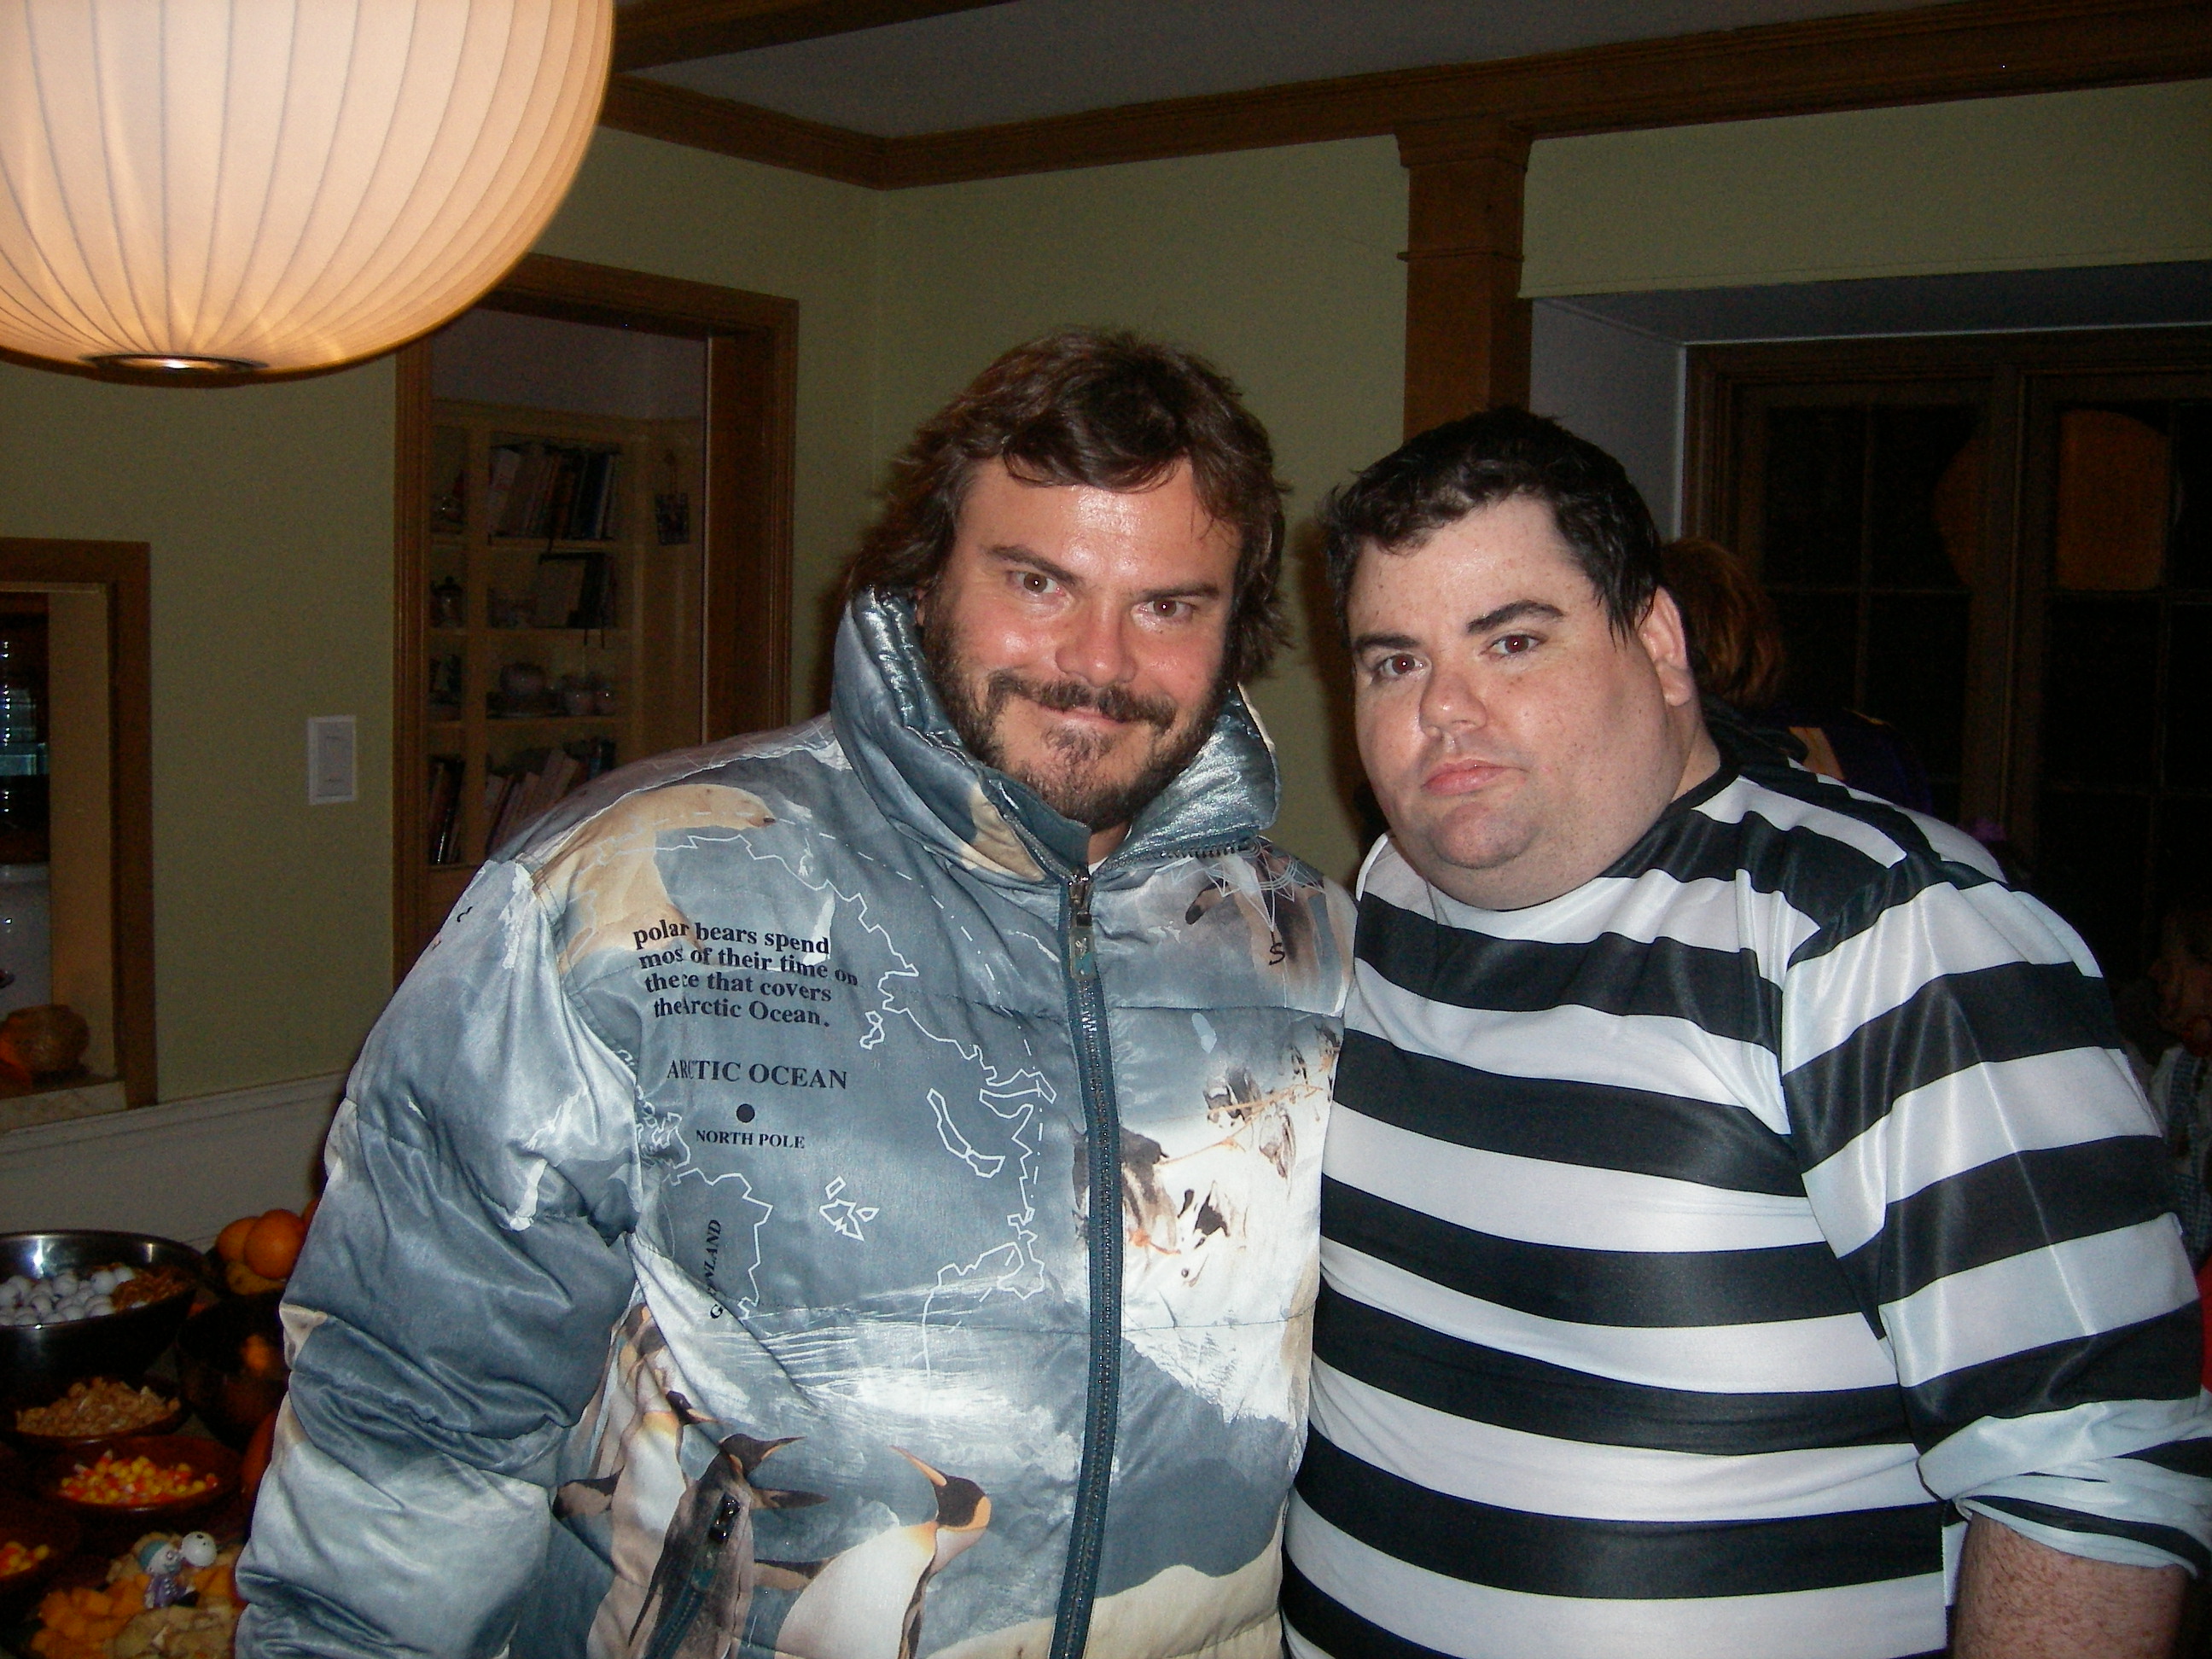 On Set: How To Make It In Hollywood(L-R)Jack Black, Michael Ray Bower